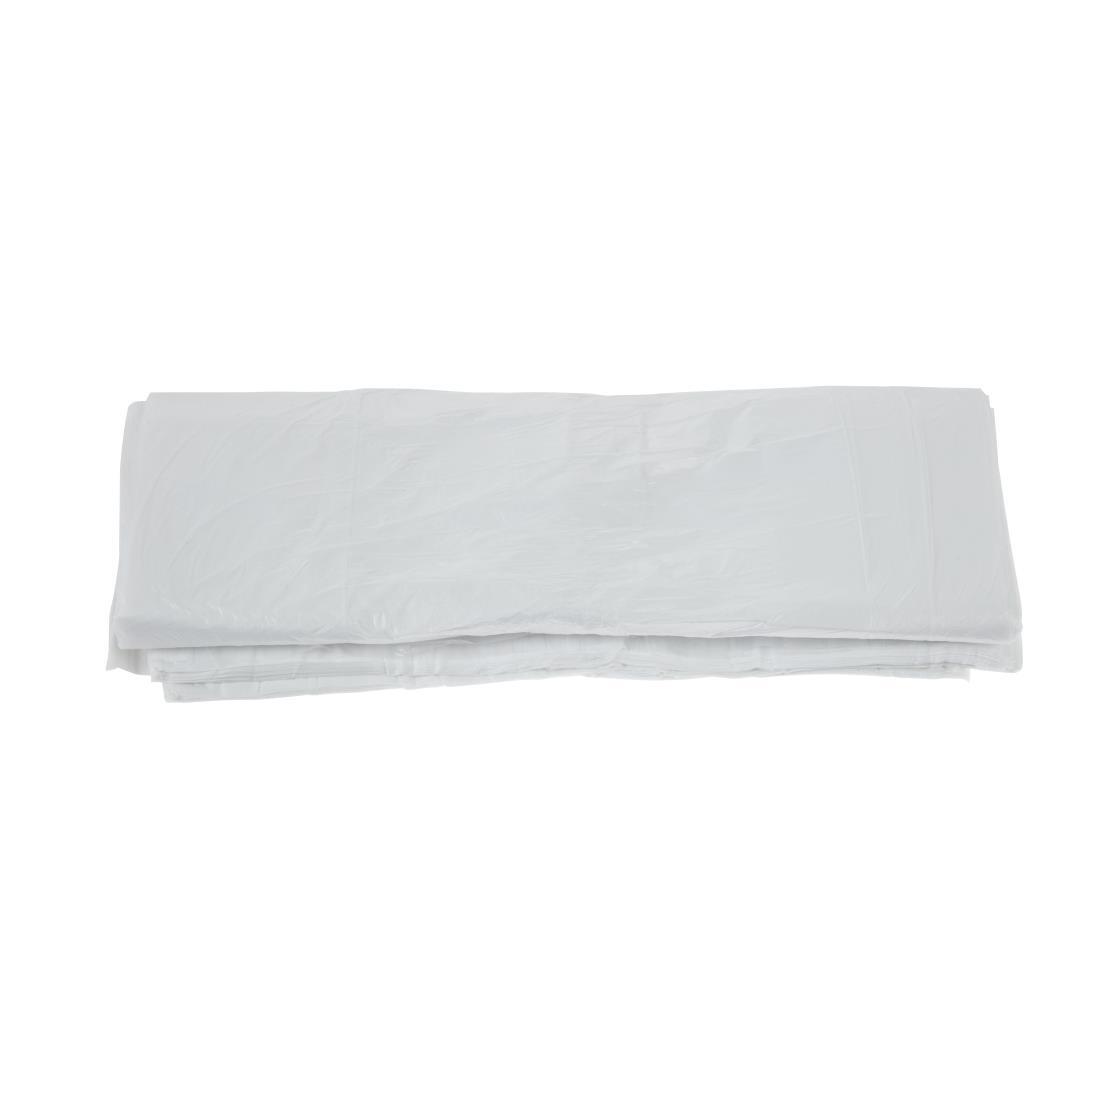 Jantex Small White Pedal Bin Liners 30Ltr (Pack of 1000) - GF279  - 2